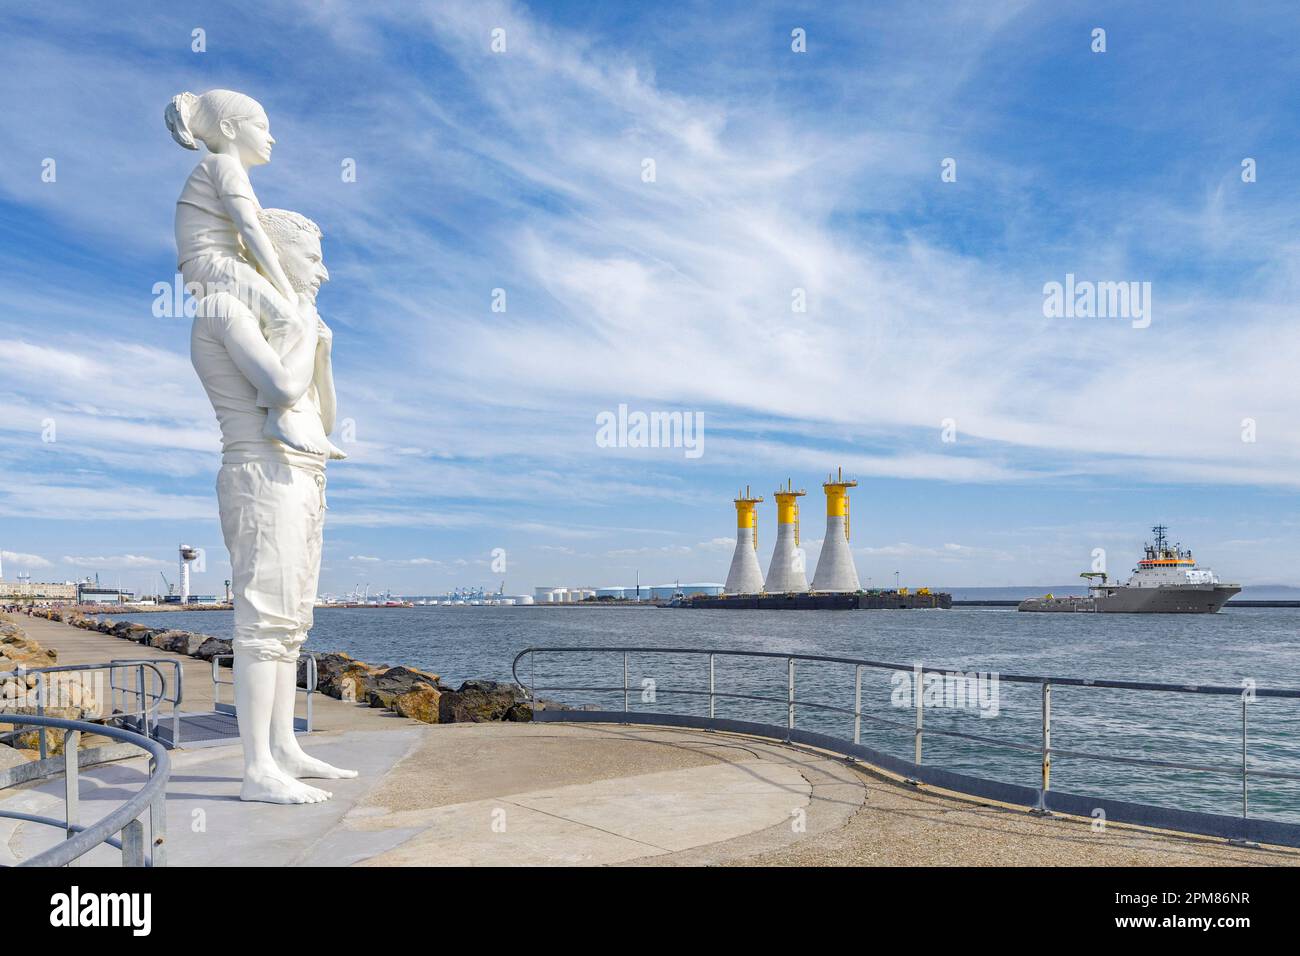 France, Seine-Maritime (76), Le Havre, the port, Augustin Normand dyke, Until the End of the World statue, a father and his daughter, sculpted by Fabien Merelle, observe a tugboat towing 3 gravity-based structures (GBS) towards the offshore wind farm of Fécamp Stock Photo